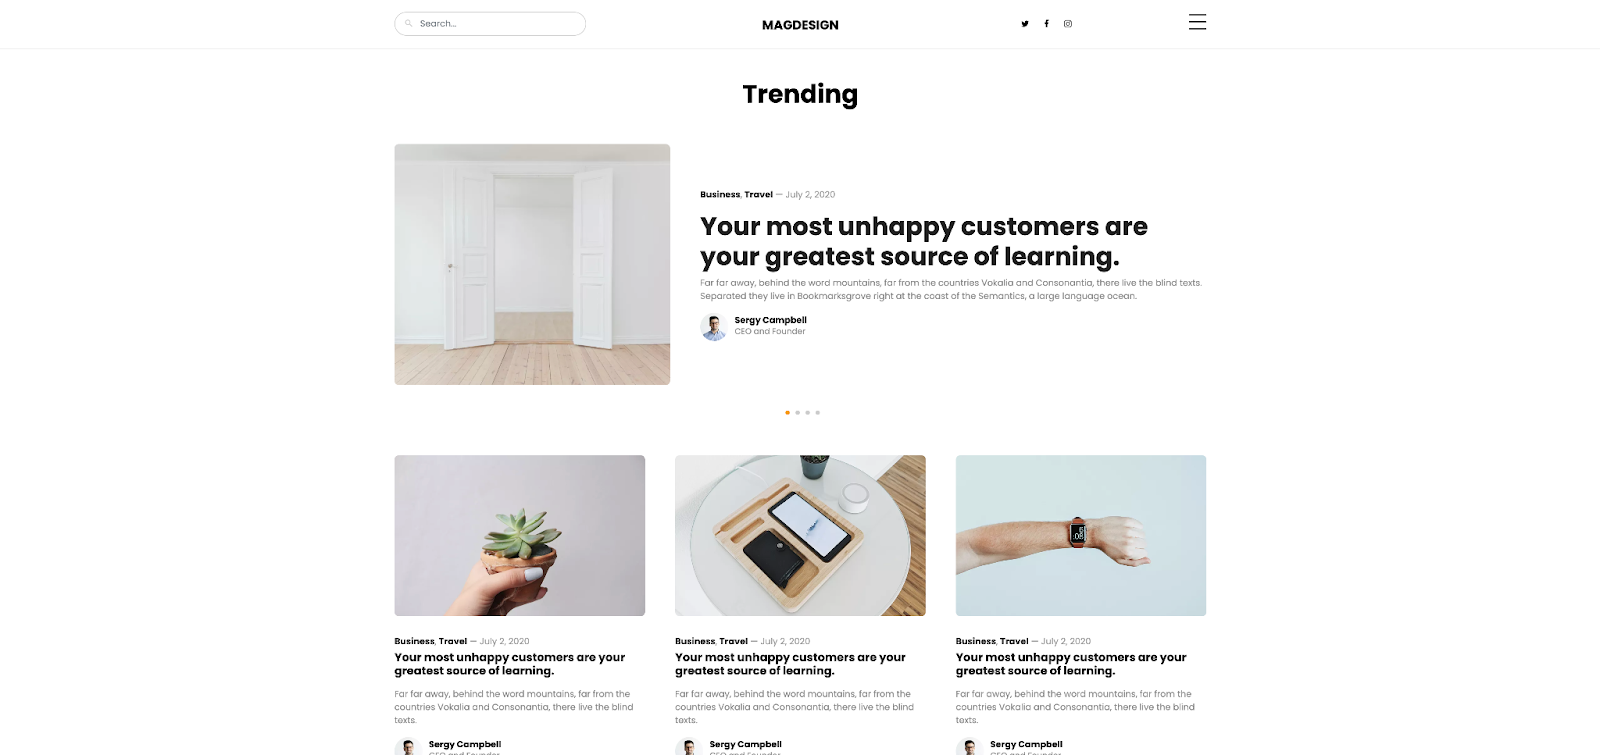 Use Magdesign to create a minimal, serene blog with a zenlike feel